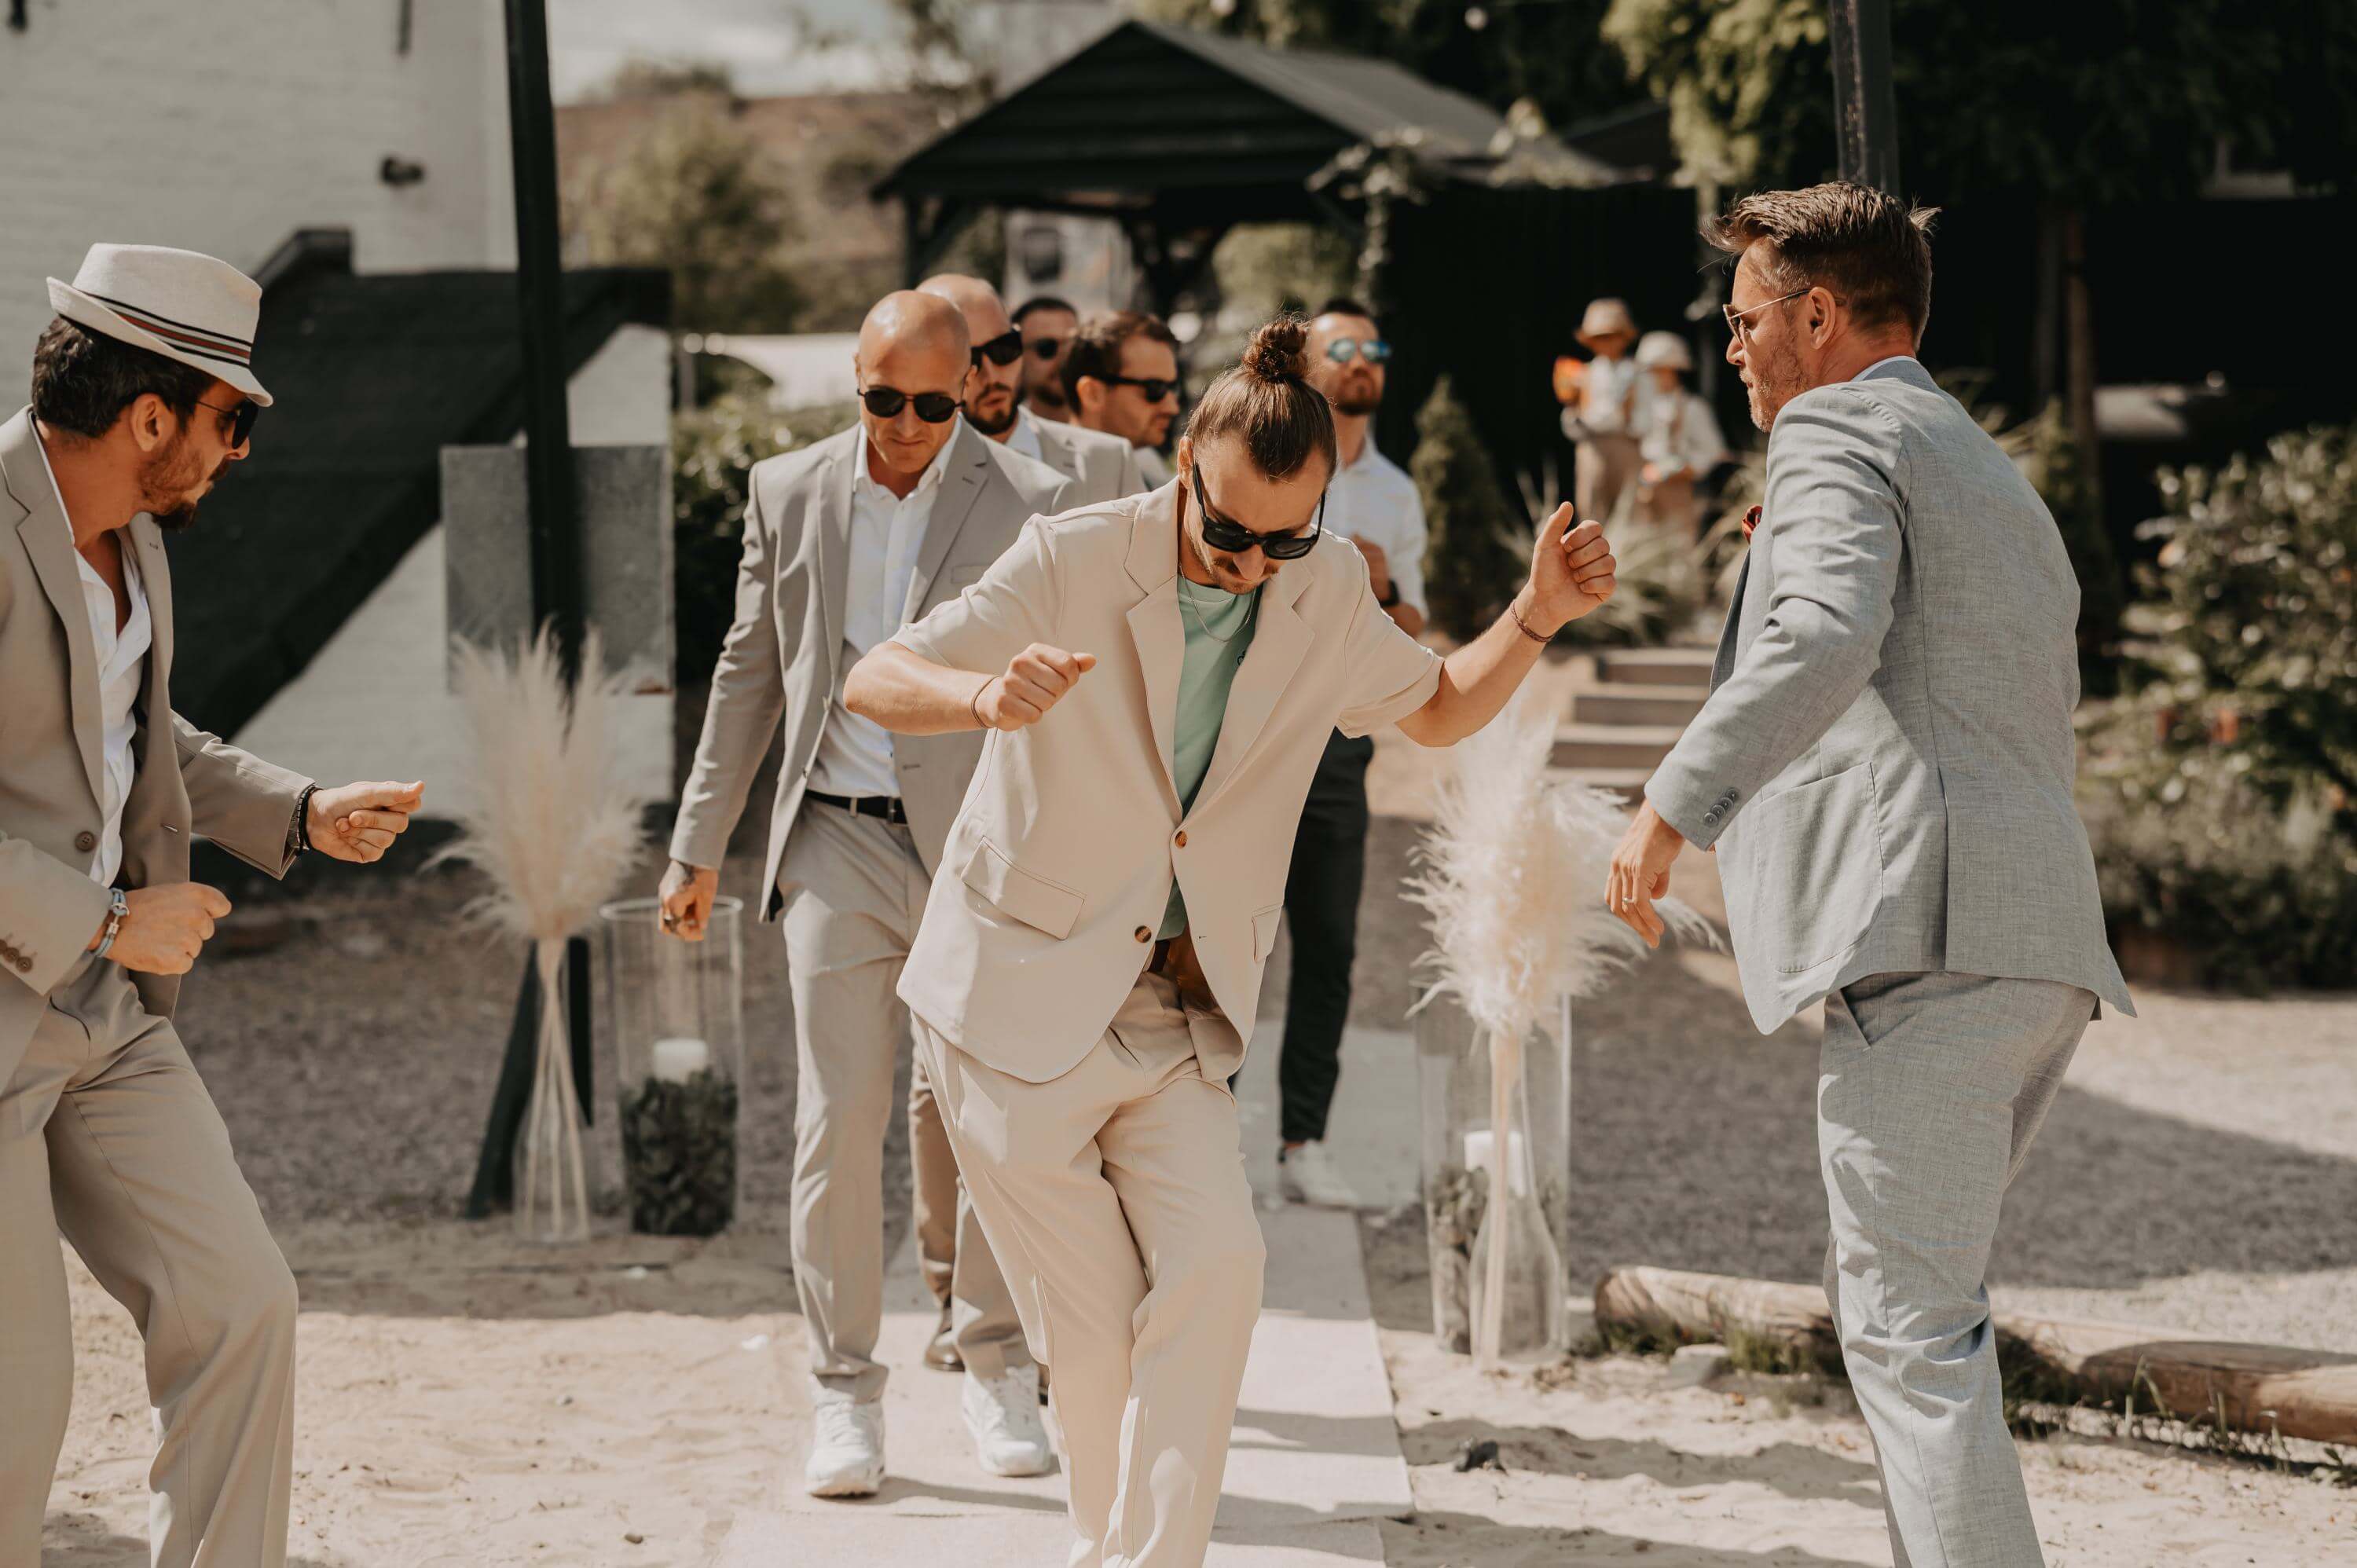 Before the groom marches in for the free wedding ceremony, his witnesses and guests also move to the location, dancing loosely.